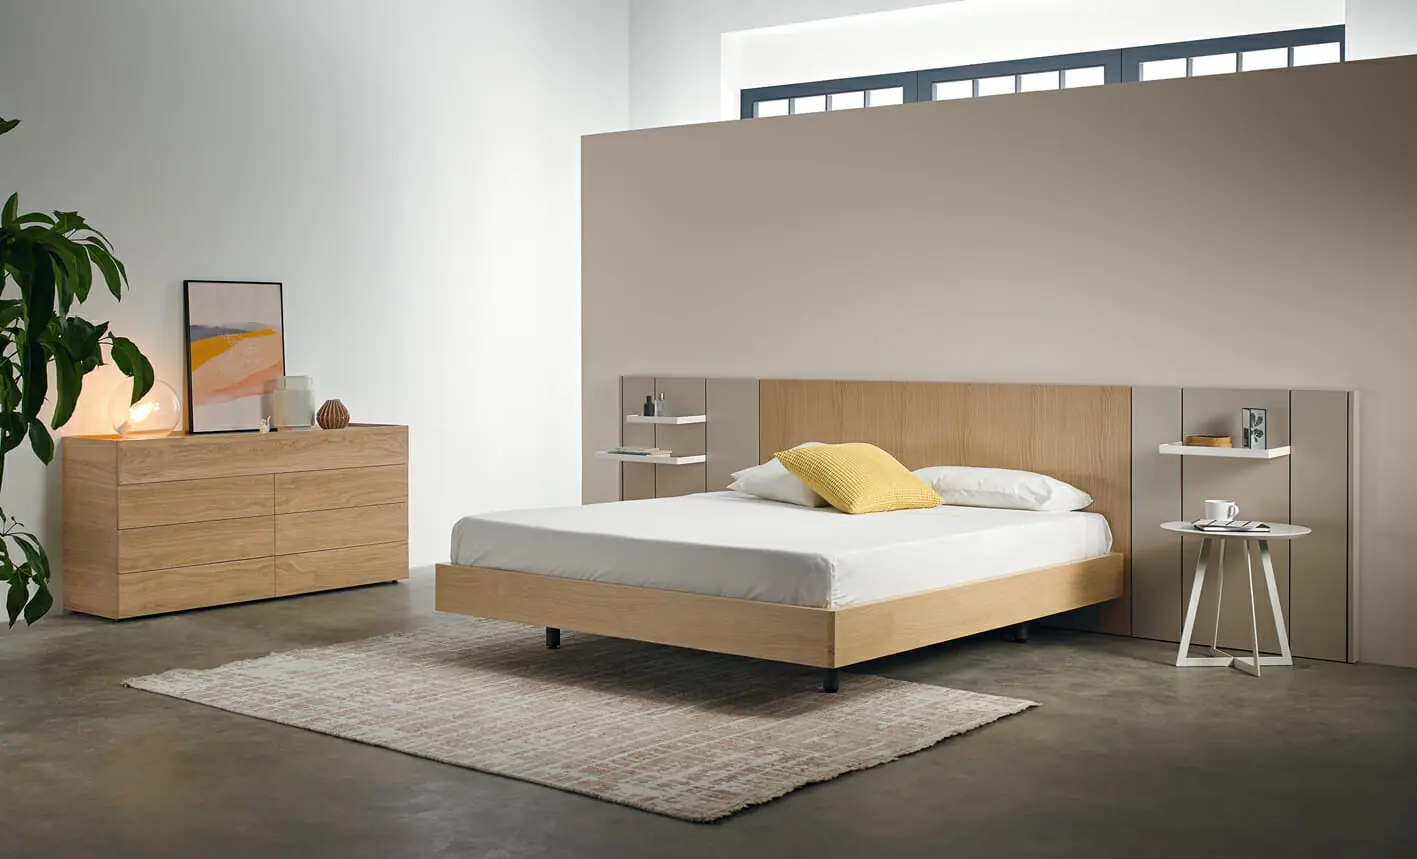 52593-17190-bedroom-collections